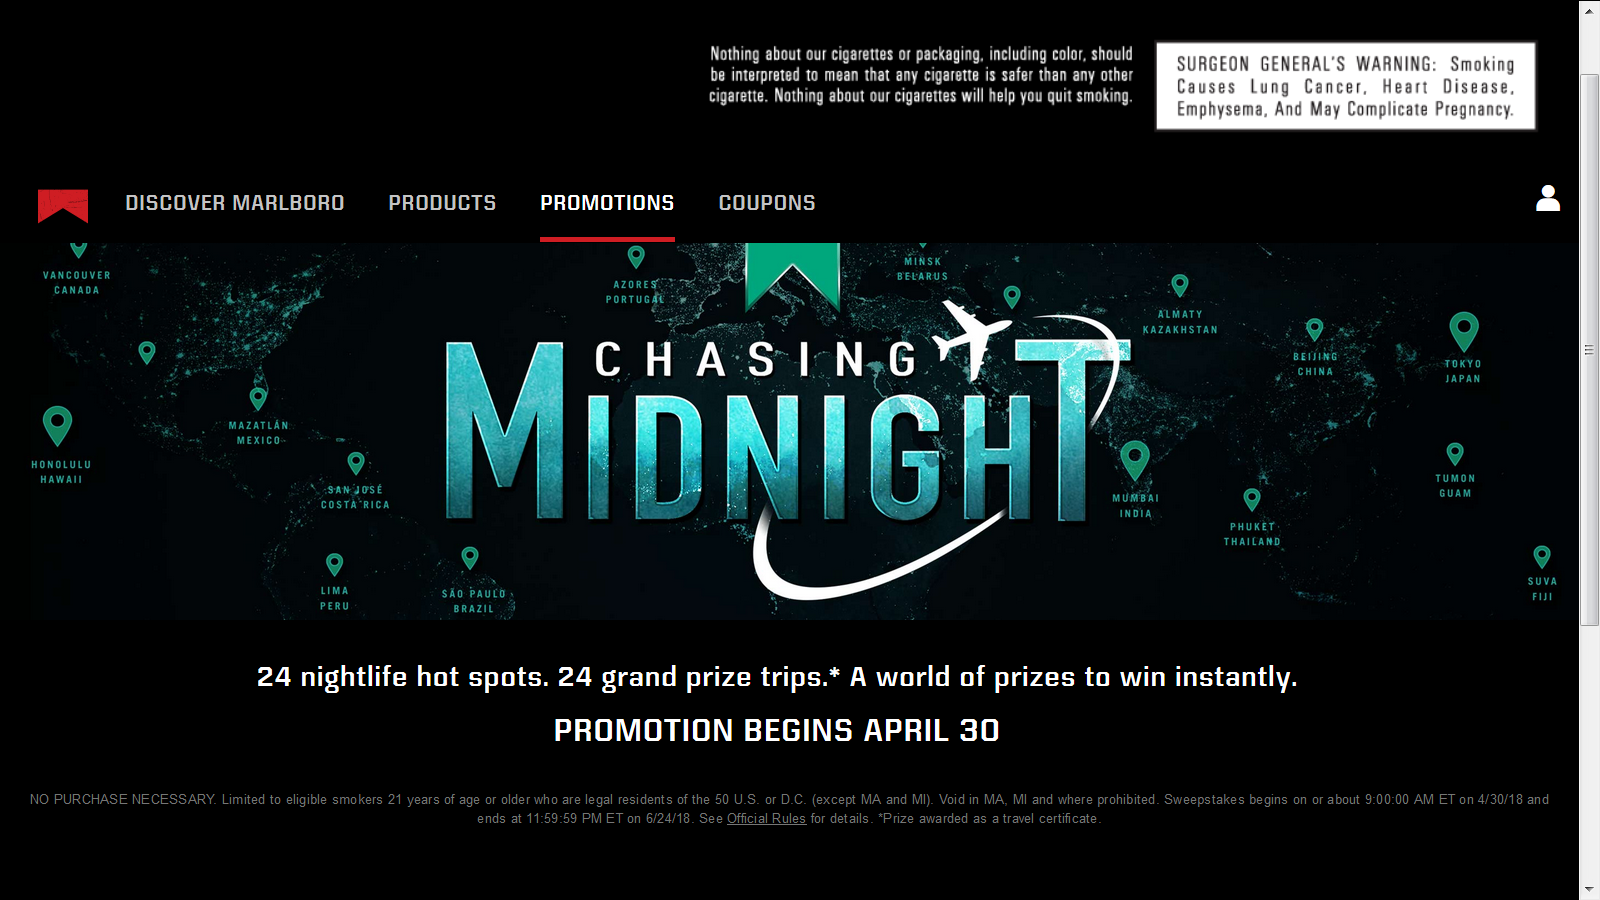 Marlboro "CHASING MIDNIGHT" contest and IW begins 4/30/18.  Ends 6/24/18